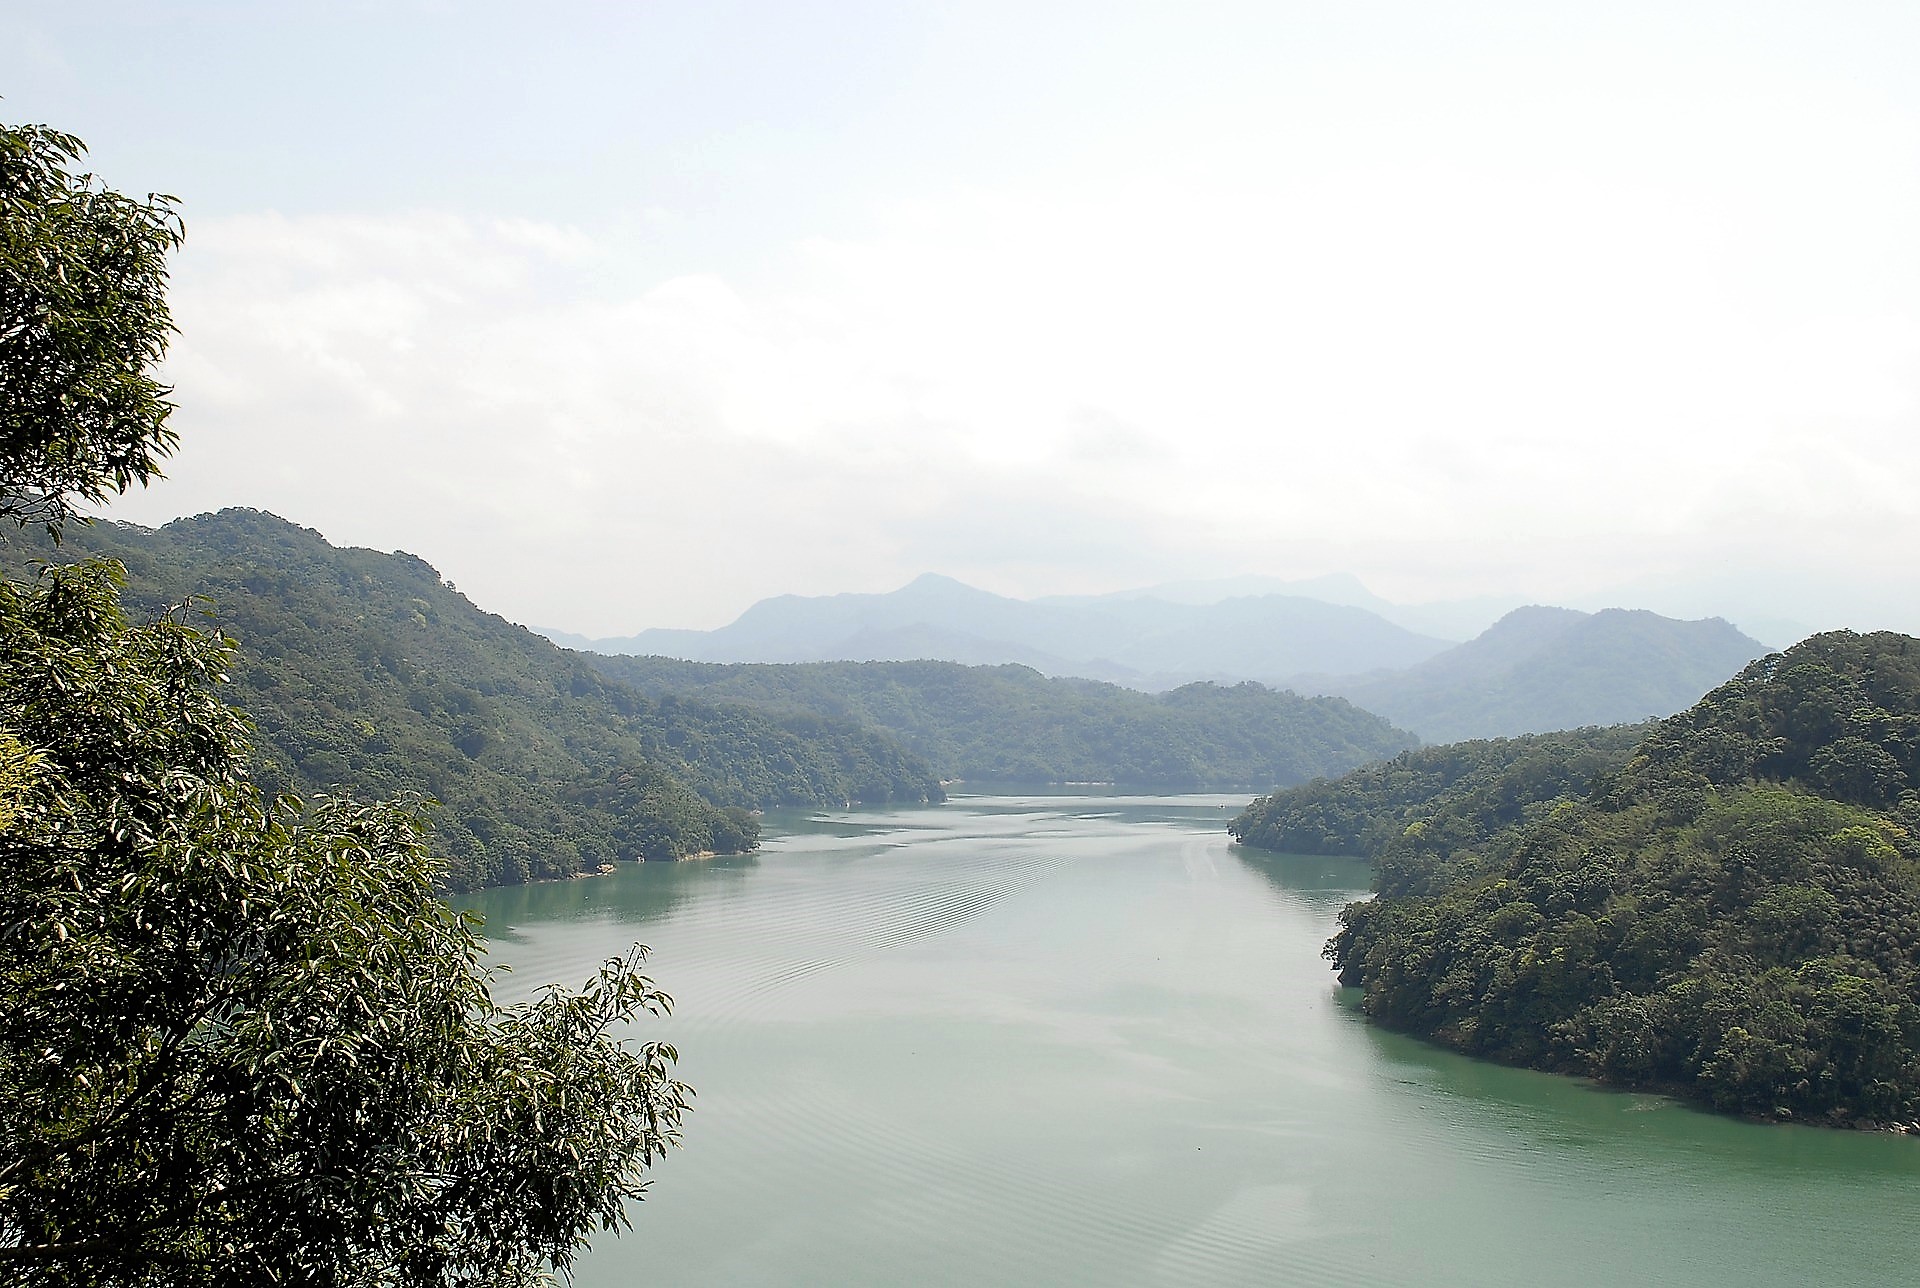 Taiwan's Shihmen Reservoir surrounded by wooded hills.